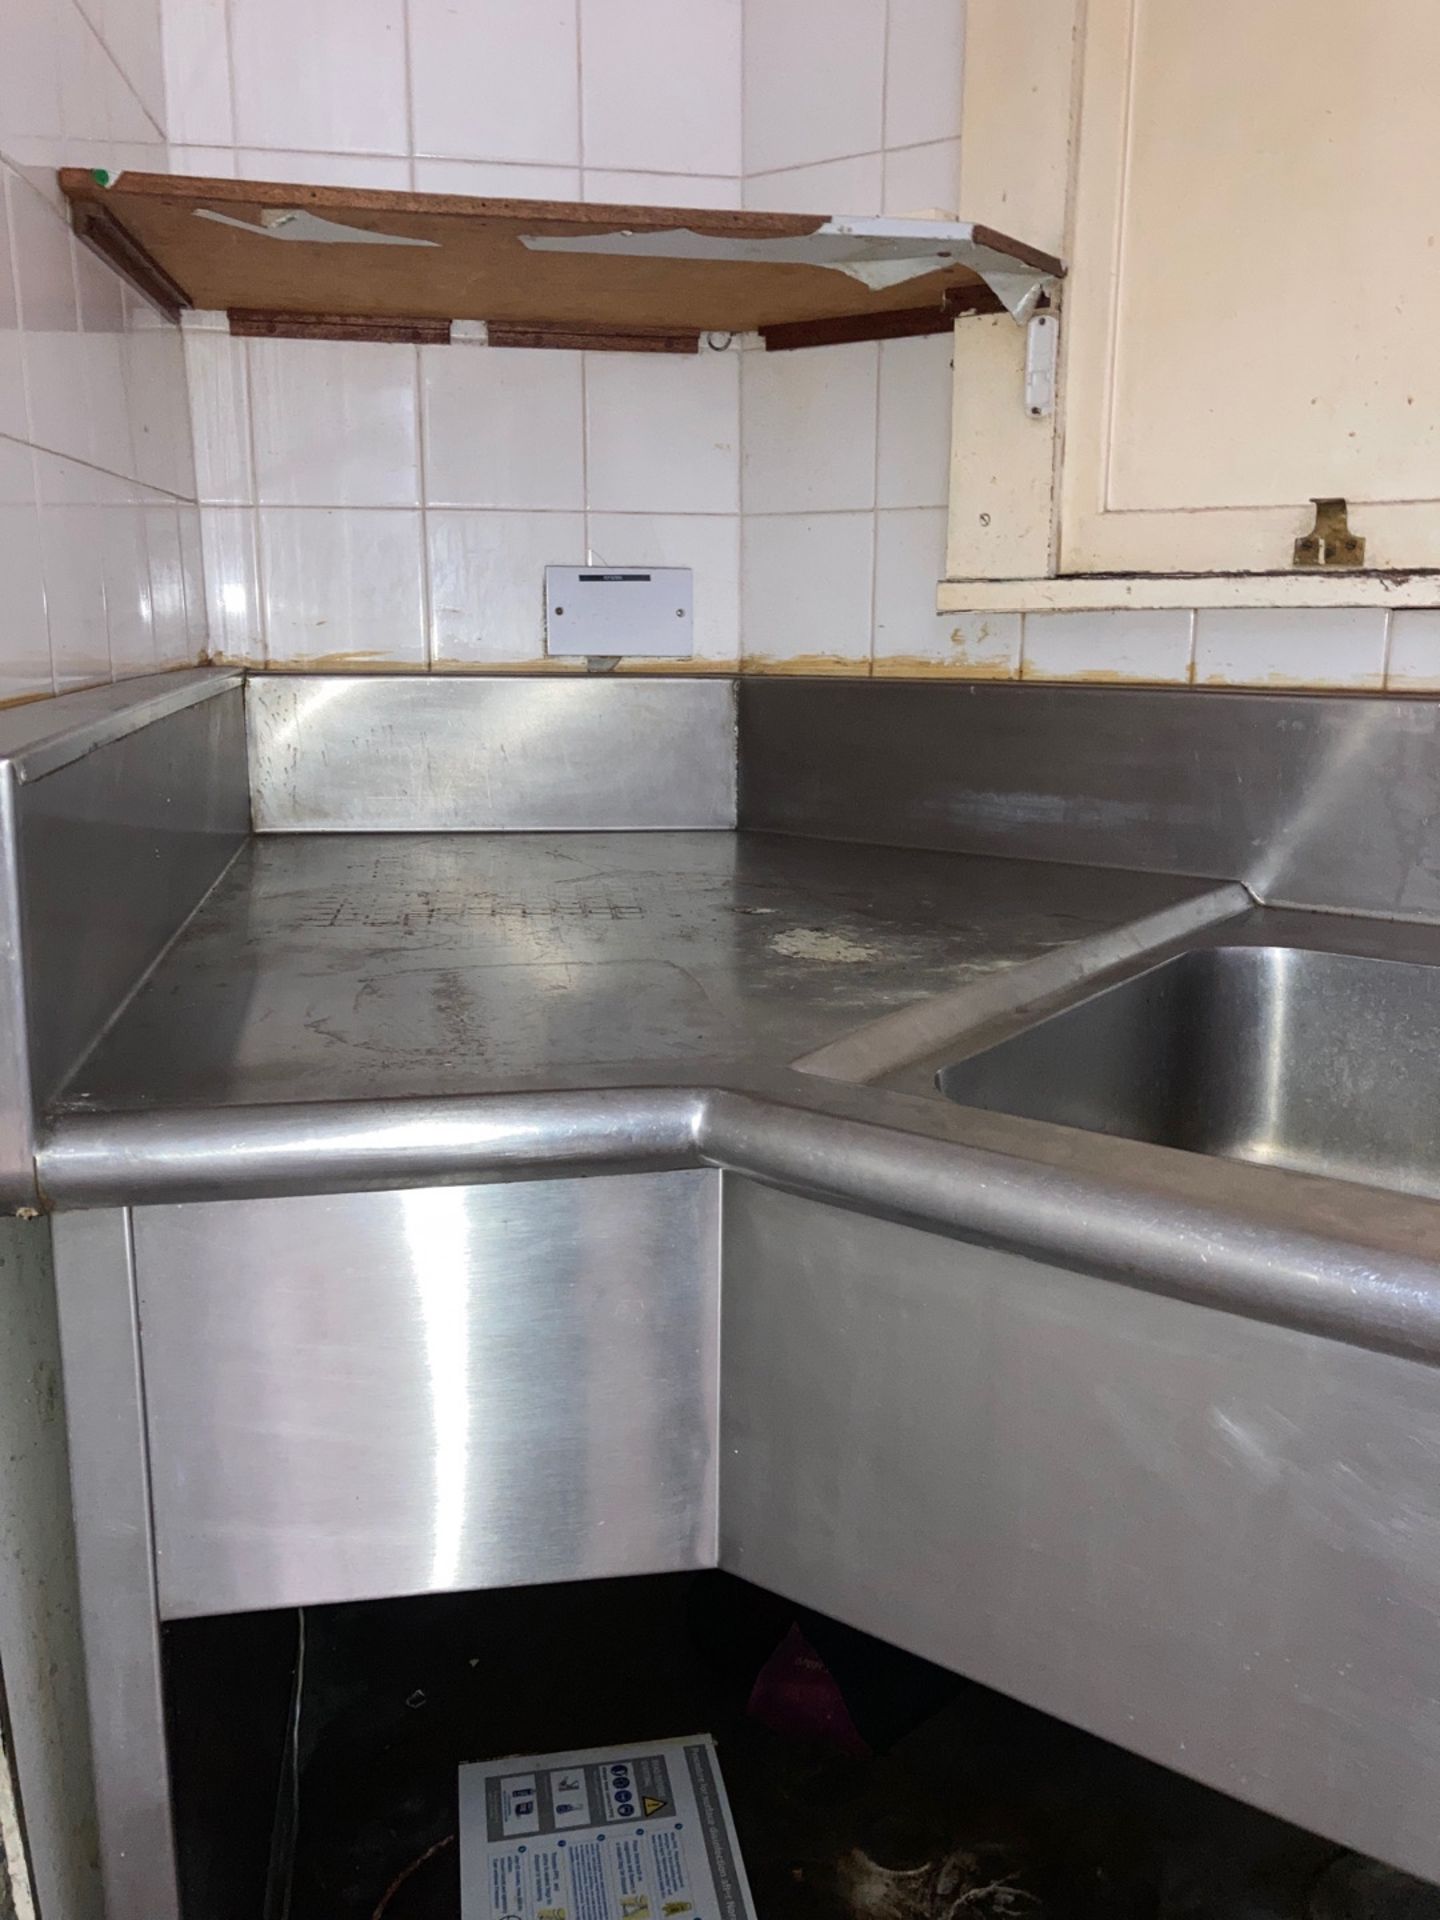 Stainless Steel Sink Unit - Image 11 of 12